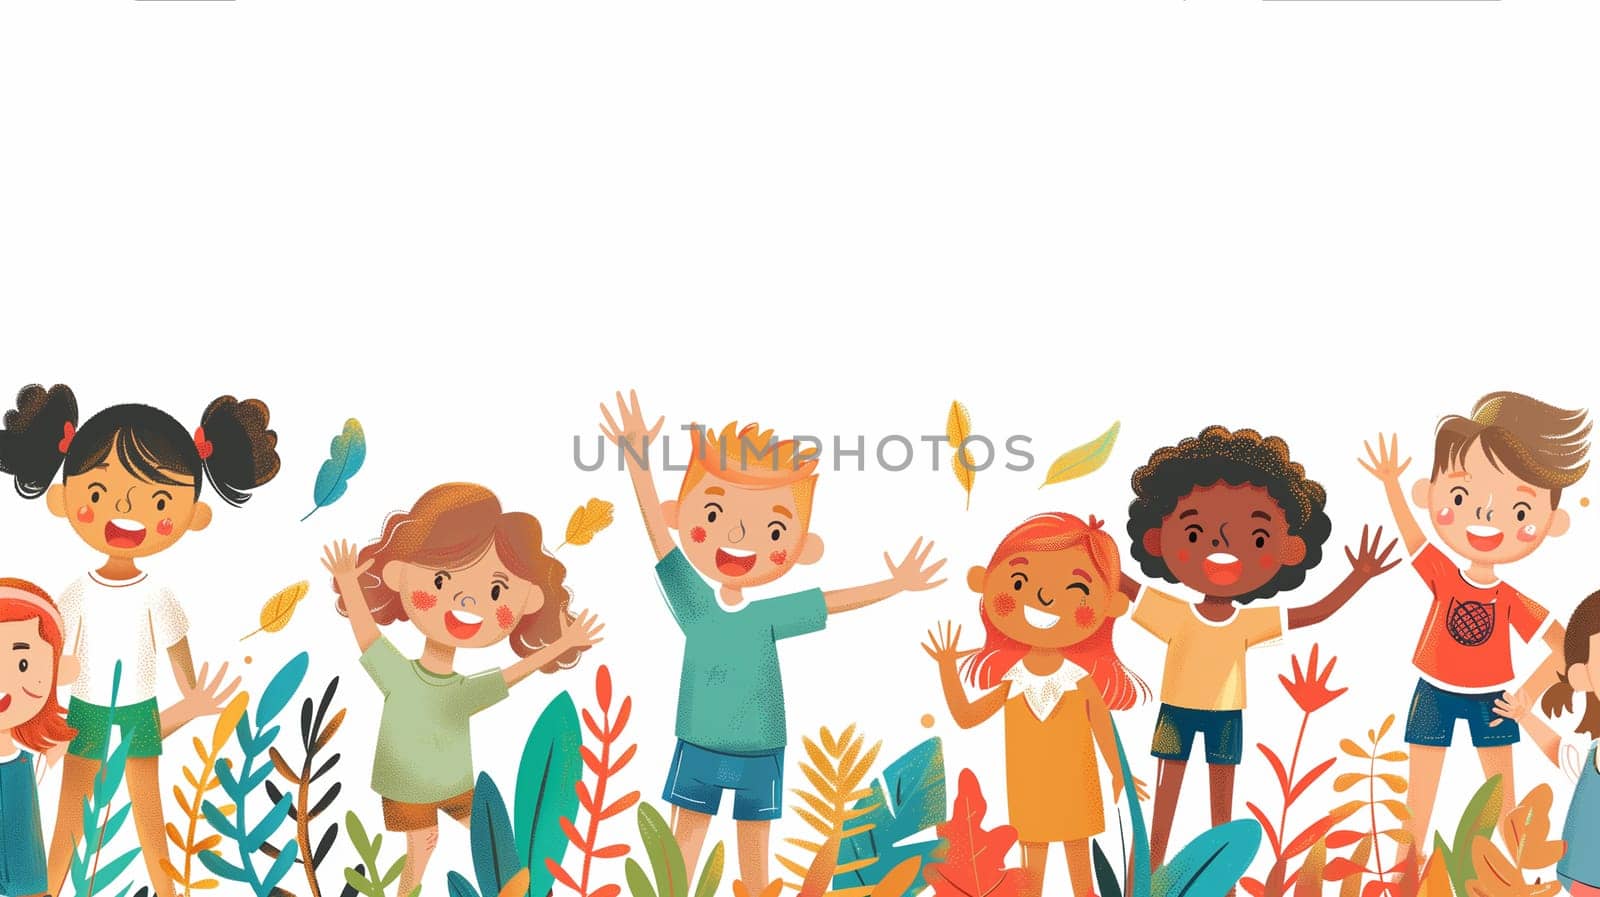 A diverse group of children of different ages, genders, and ethnicities are playing and running around in a lush green field on a sunny day.